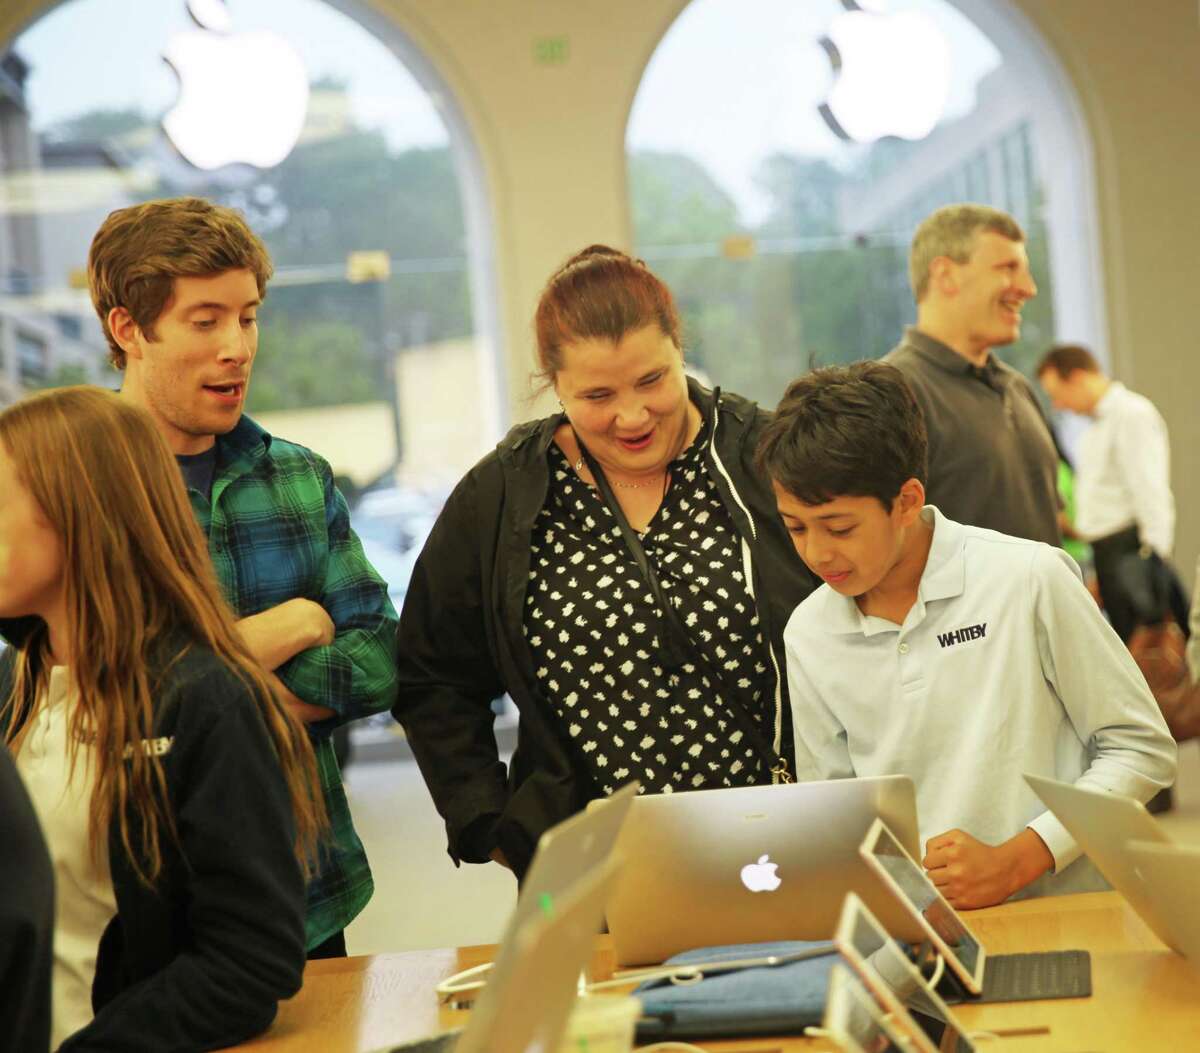 Whitby Upper School Math Teacher Joseph Budzelek, Primary Years Programme Coordinator Diana Ljepoja and sixth grader Aveer Pandey participated in a science expo at the Greenwich Apple Store Tuesday.